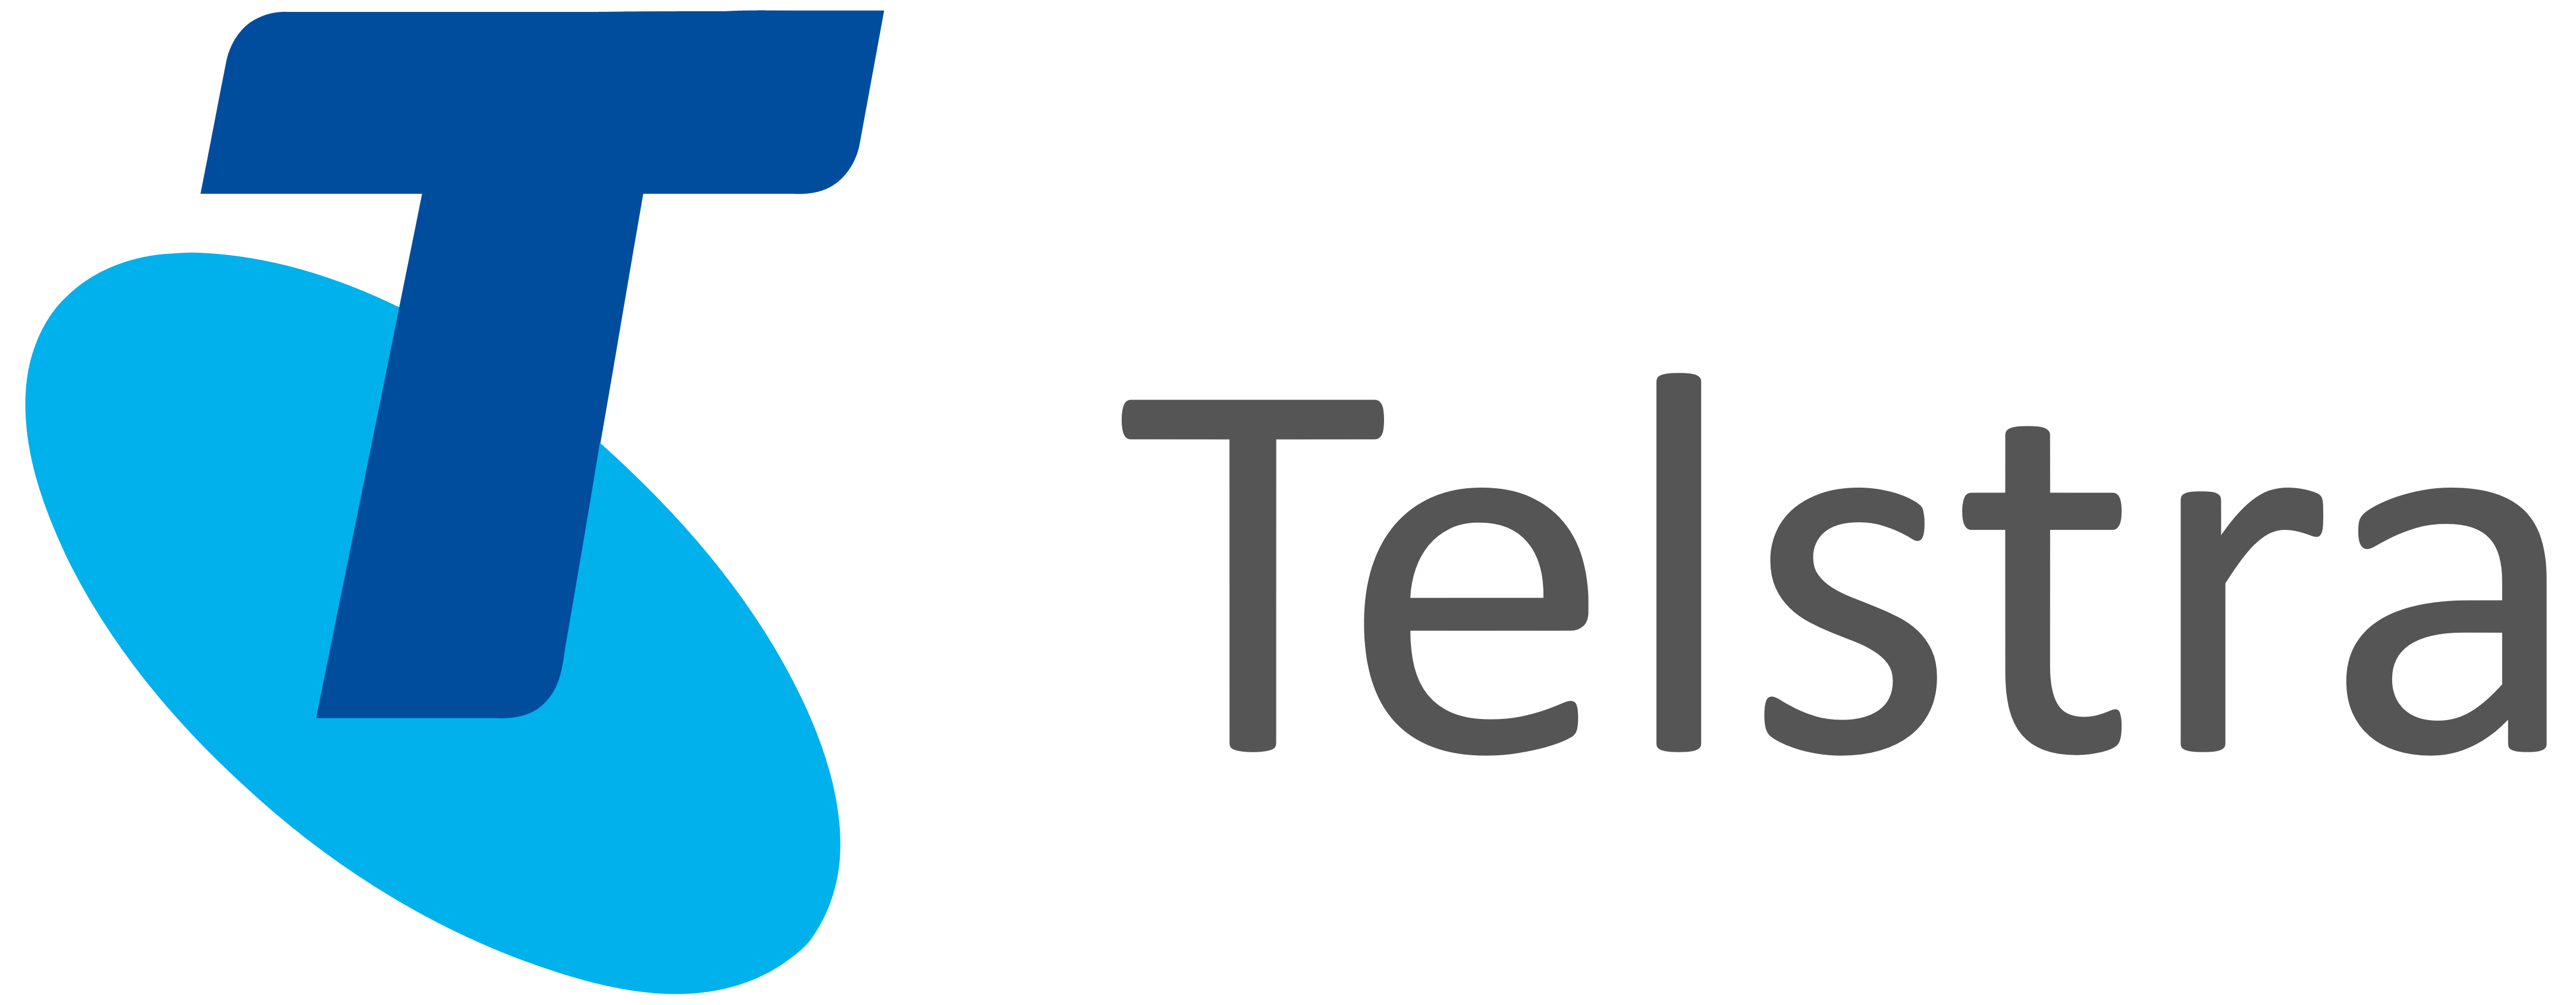 COVID-19: What Telstra is doing to help - International Institute of  Communications